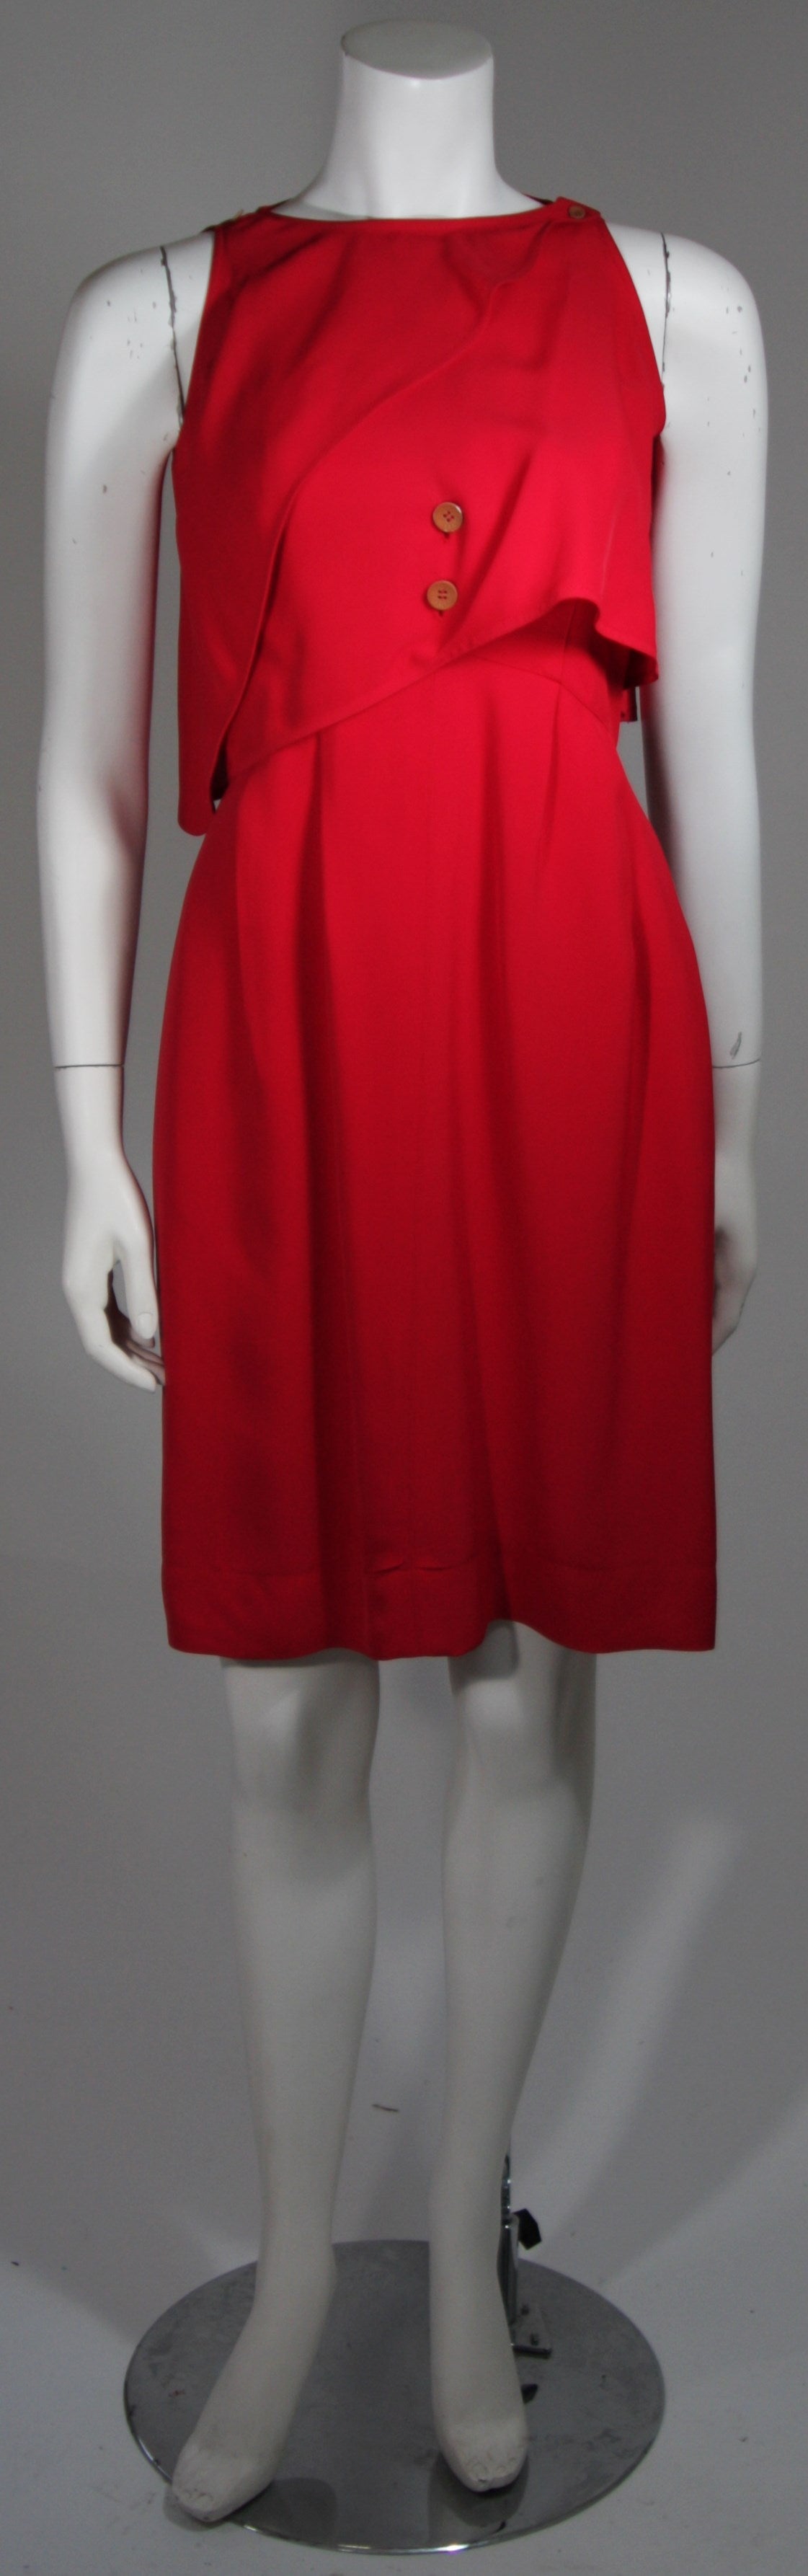 Fendi Red Cocktail Dress with Caplet Attachment and Button Details Size ...